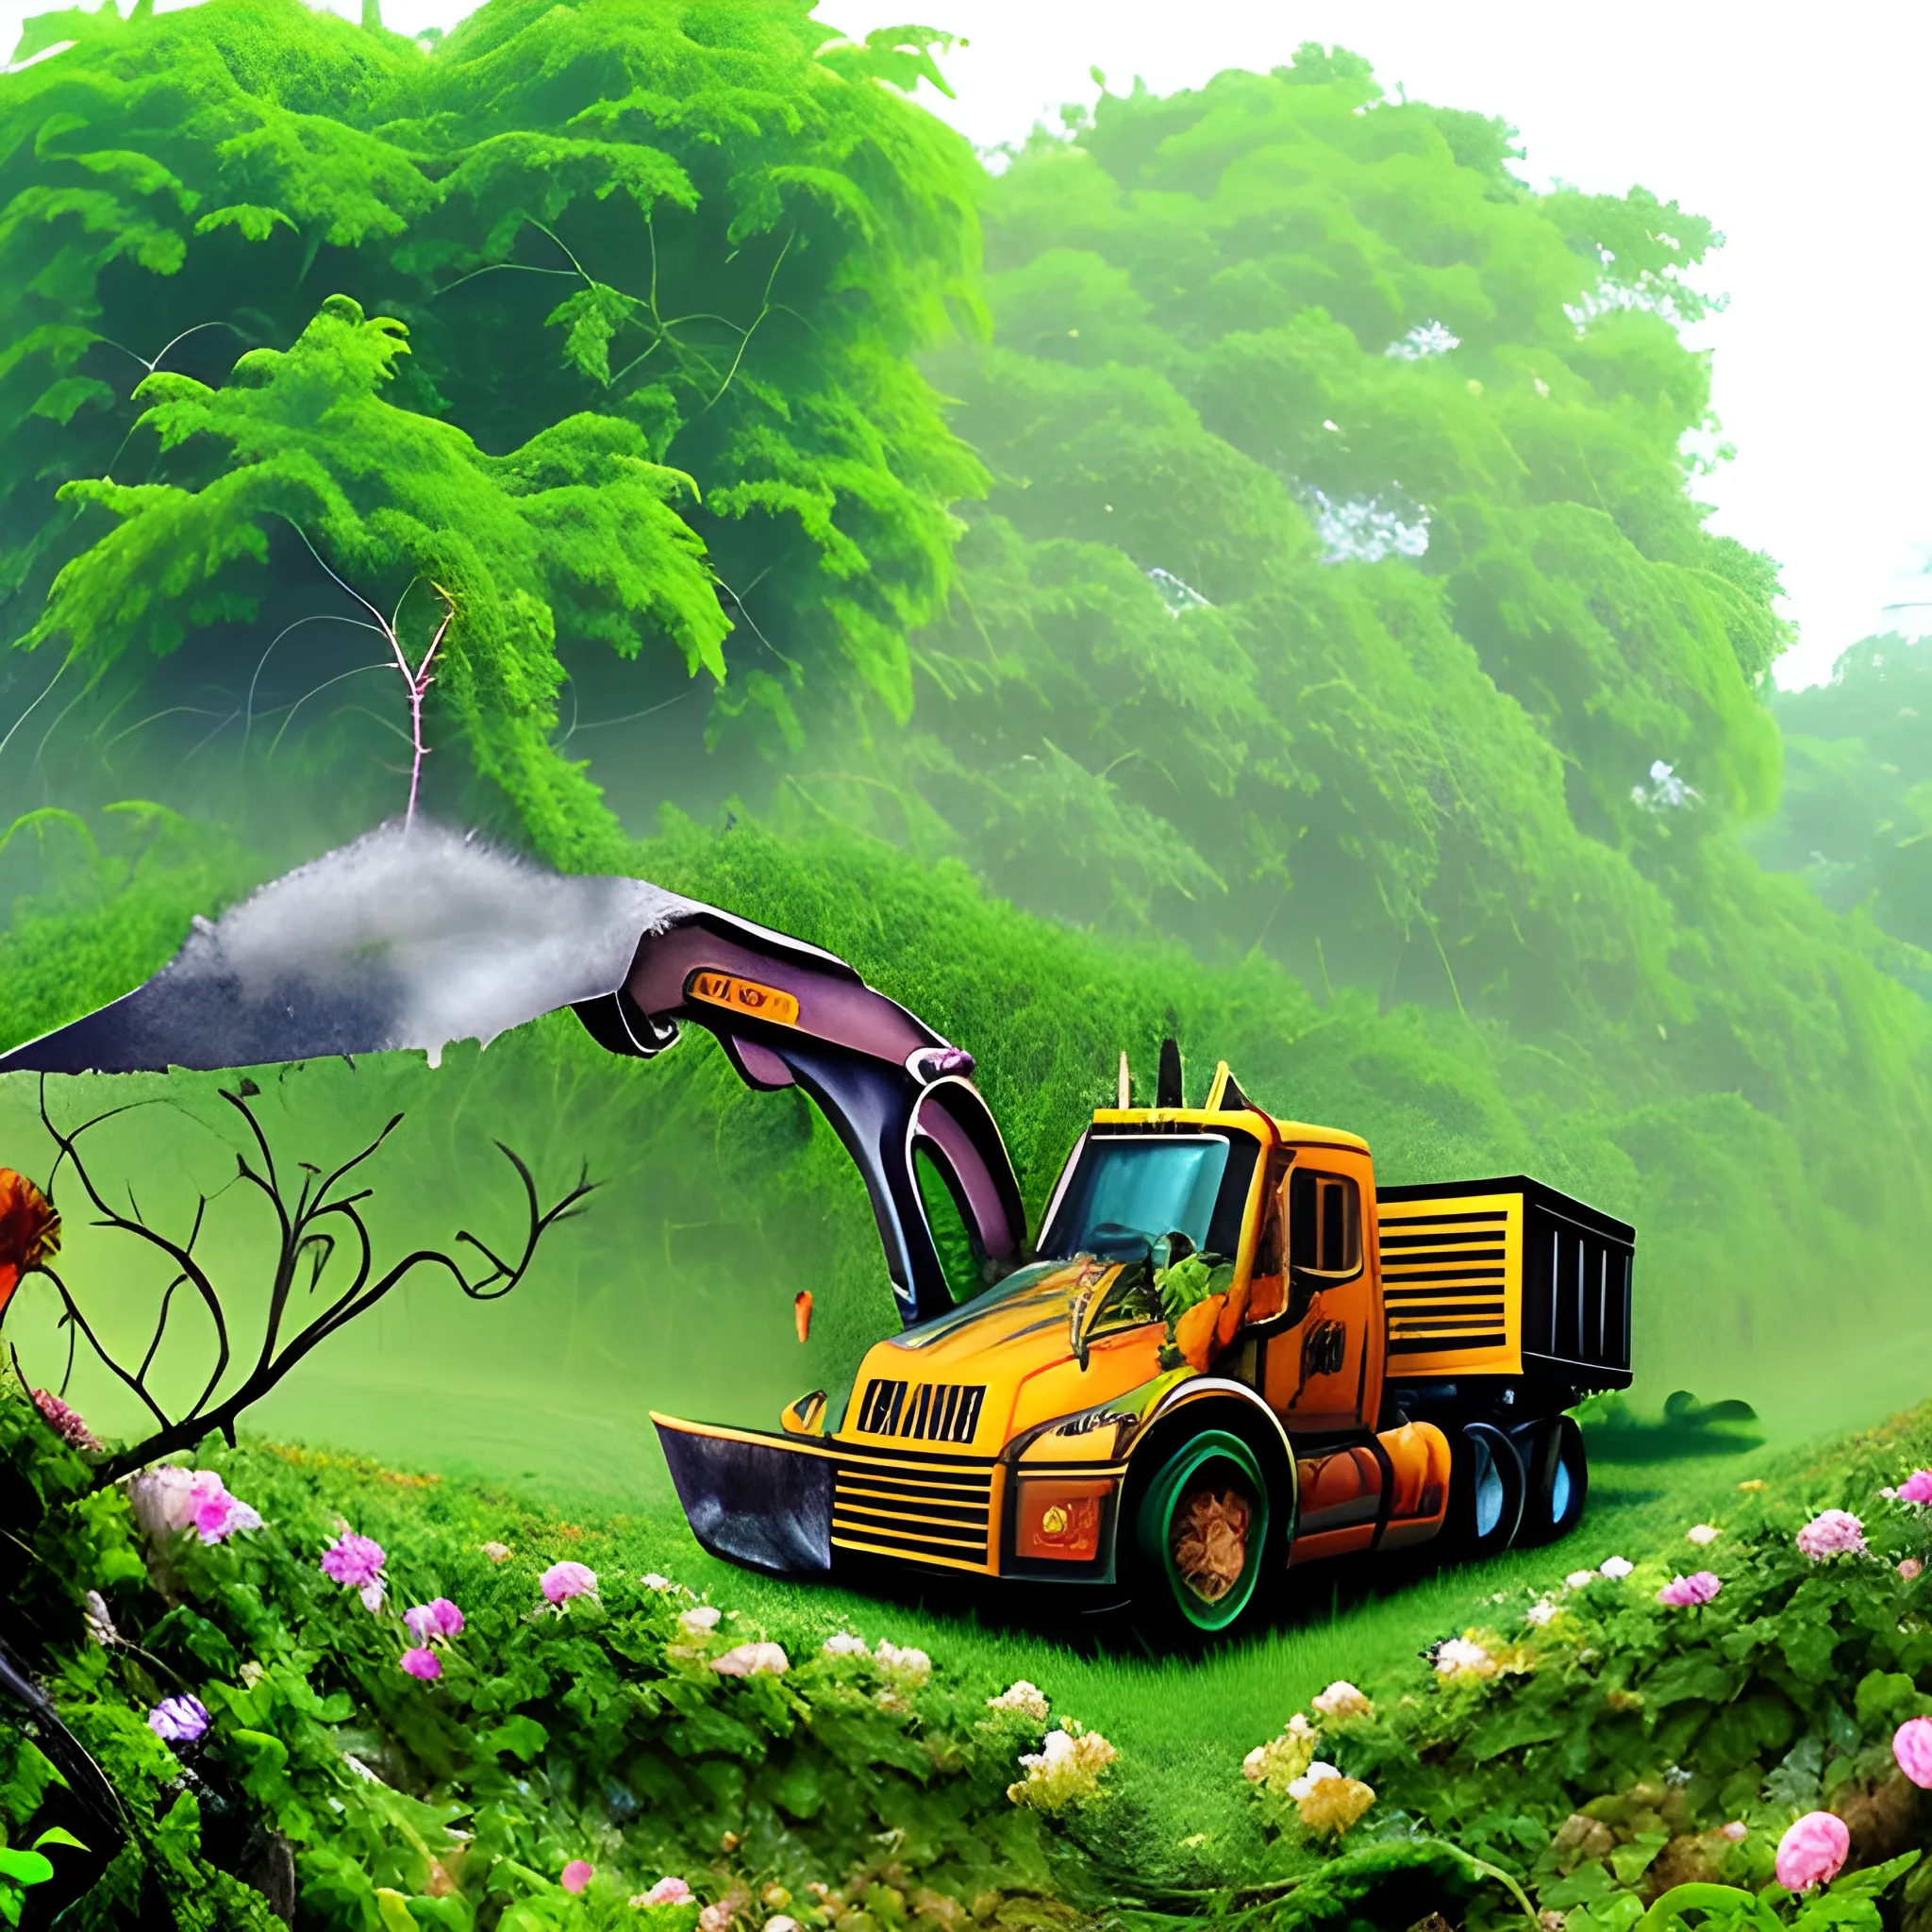 plants taking vengance on humans for destroying theire habitats by killing them, using flowers, poison and thorns to kill humans and destroy machines like trucks and chainsaws